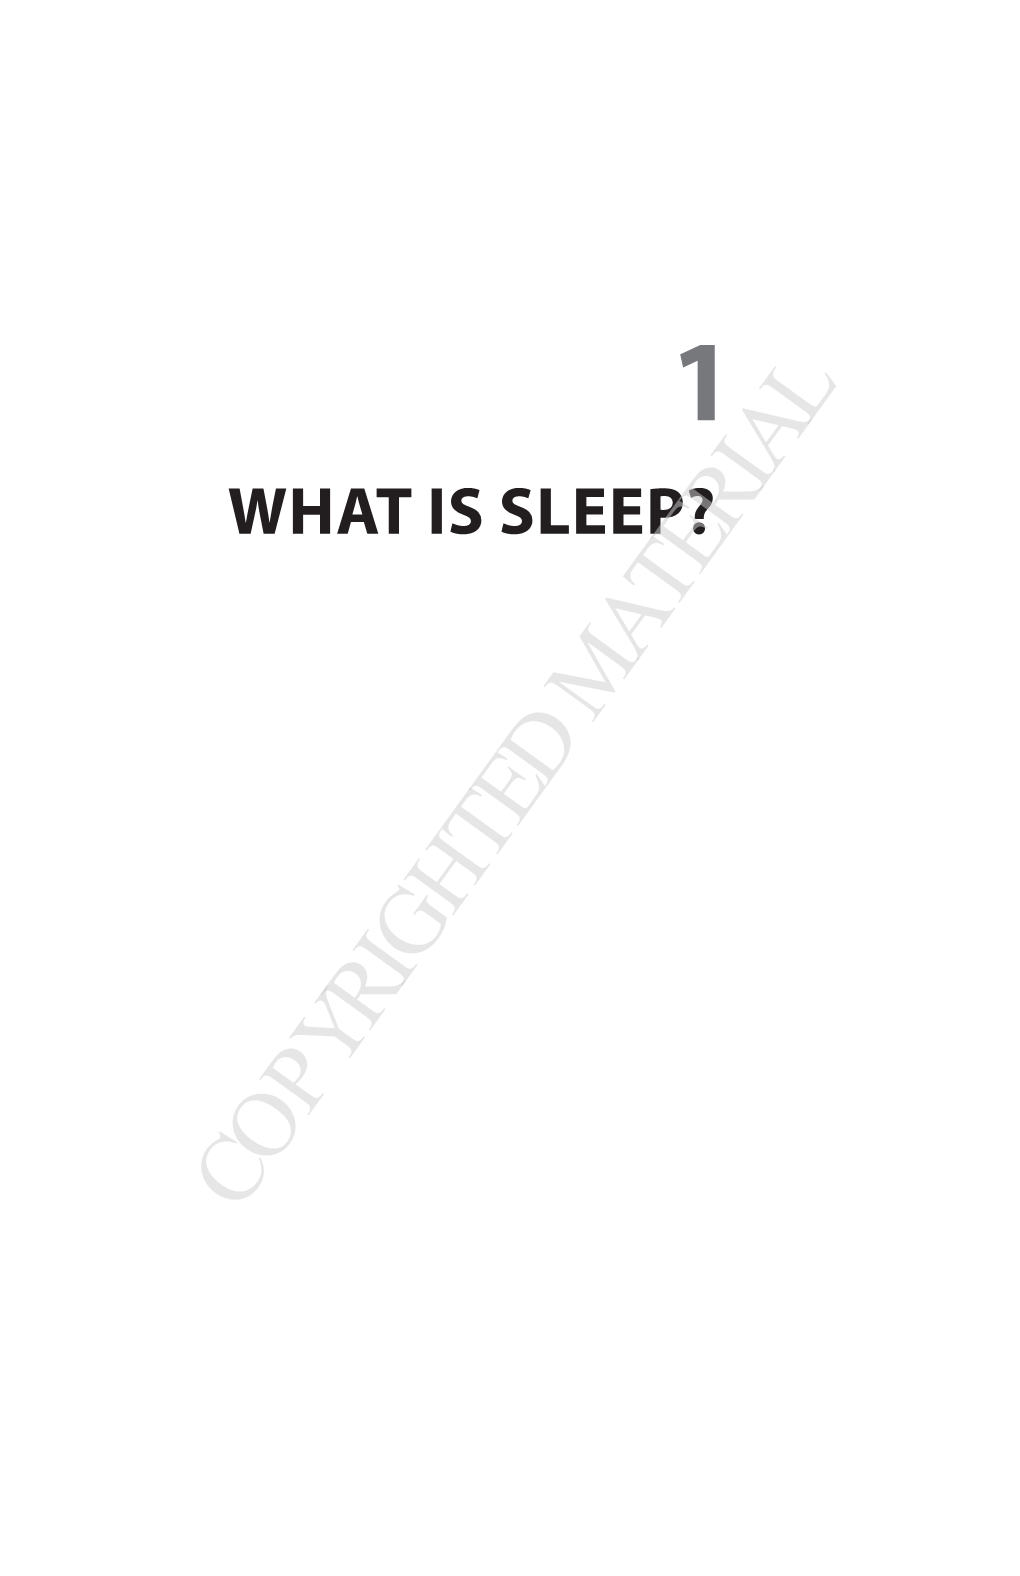 Chapter 1: What Is Sleep?